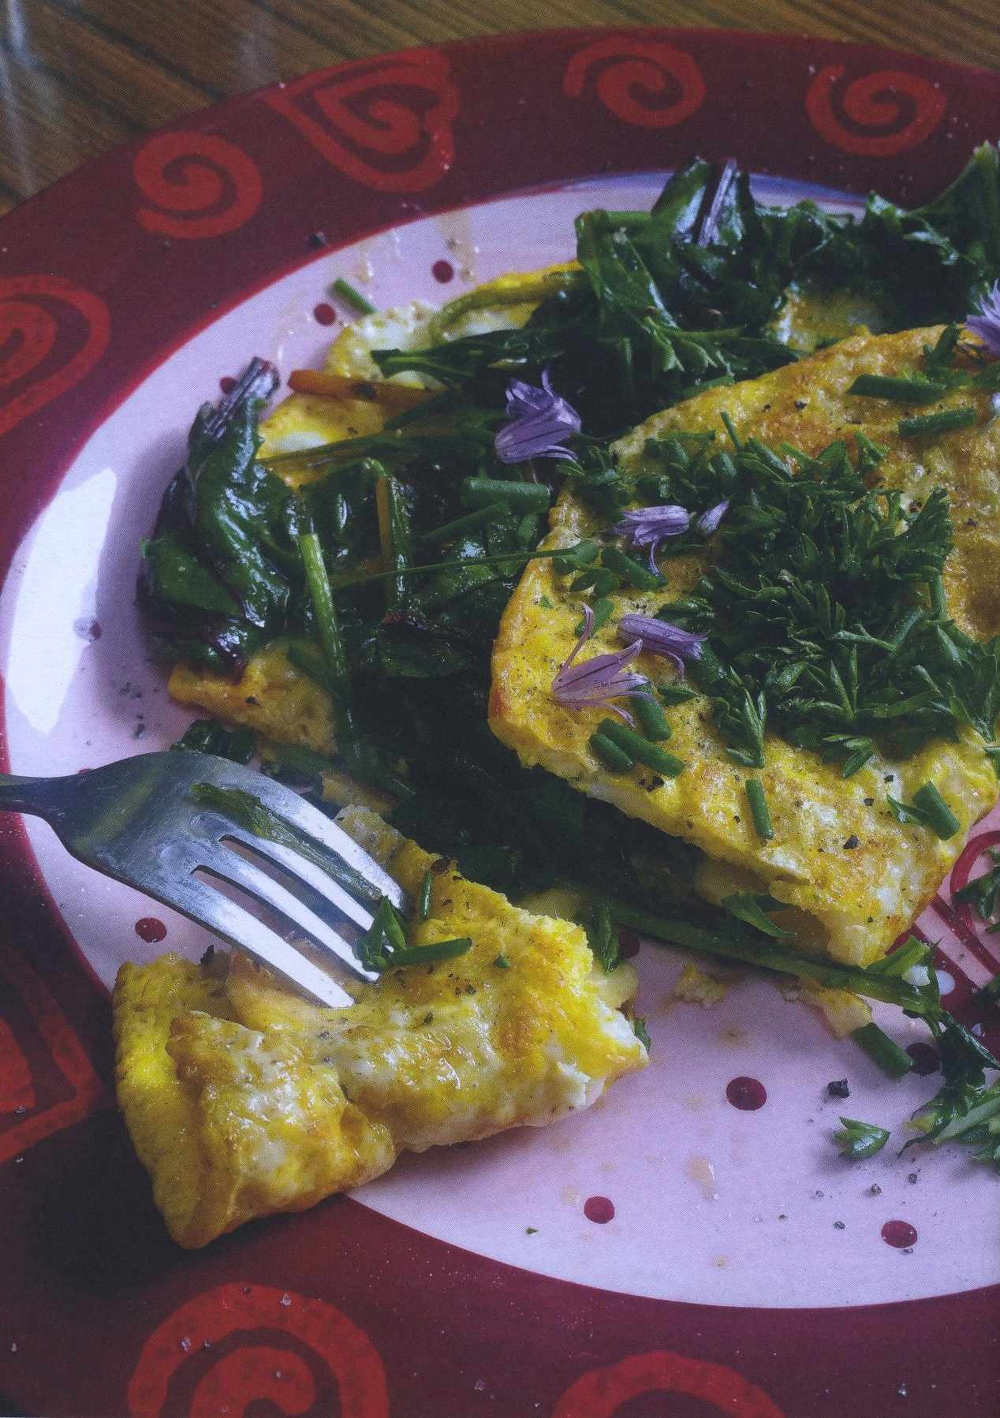 The Veg-Out Omelette